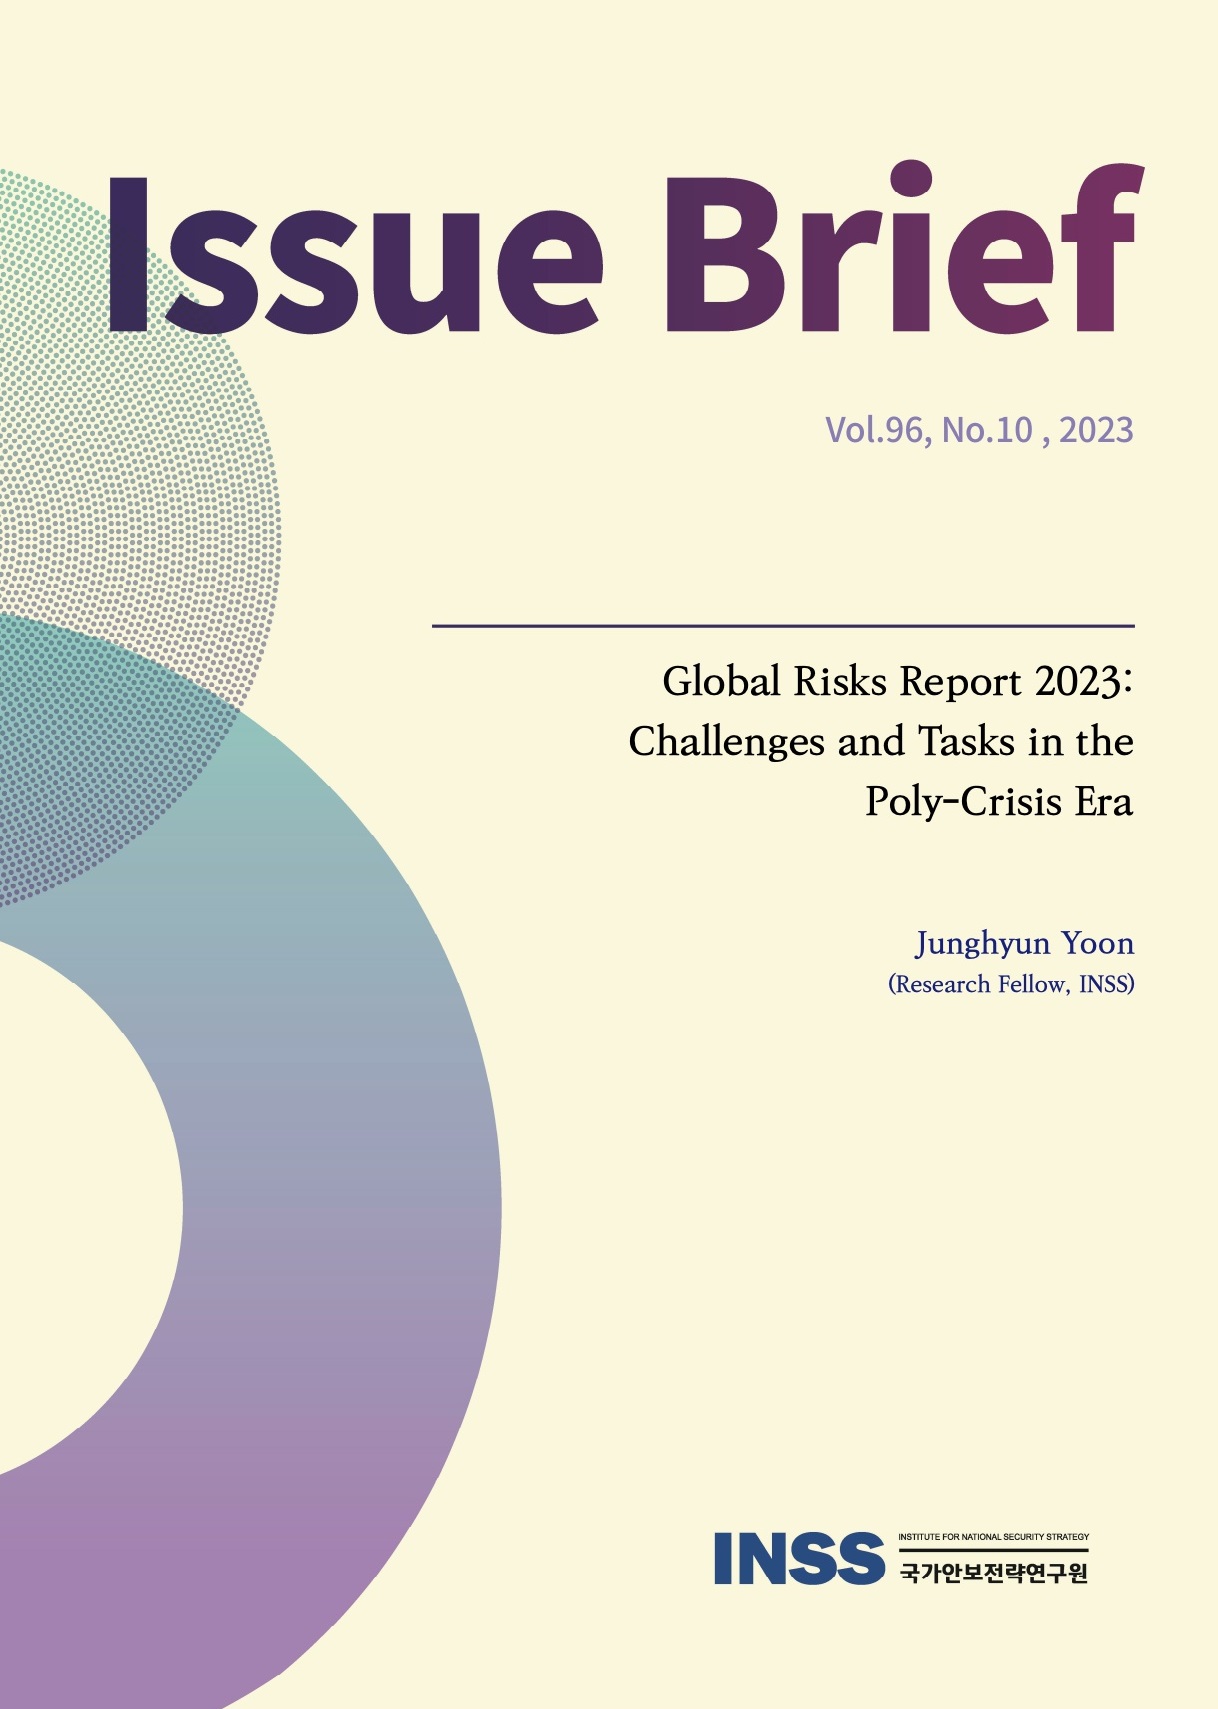 Global Risks Report 2023: Challenges and Tasks in the Poly-Crisis Era